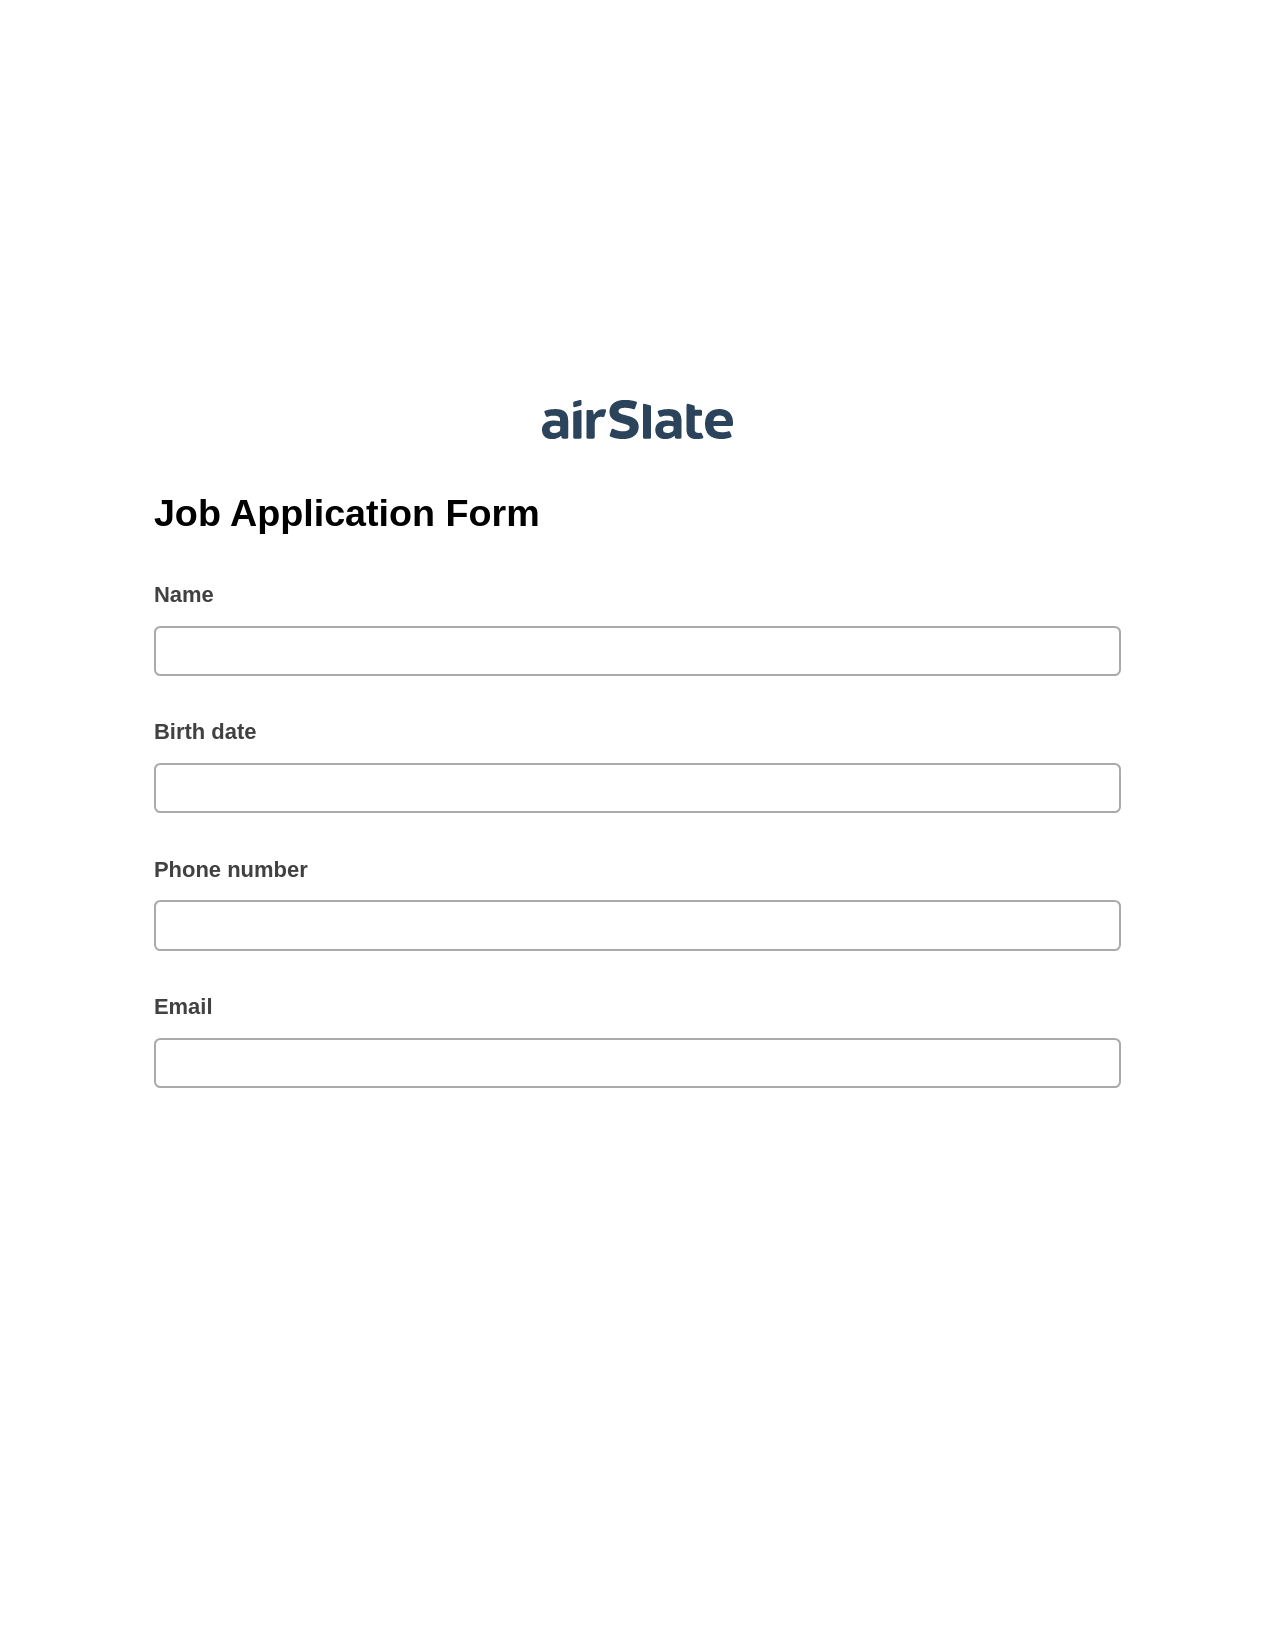 Multirole Job Application Form Pre-fill Slate from MS Dynamics 365 Records Bot, System Bot - Create a Slate in another Flow, Webhook Postfinish Bot